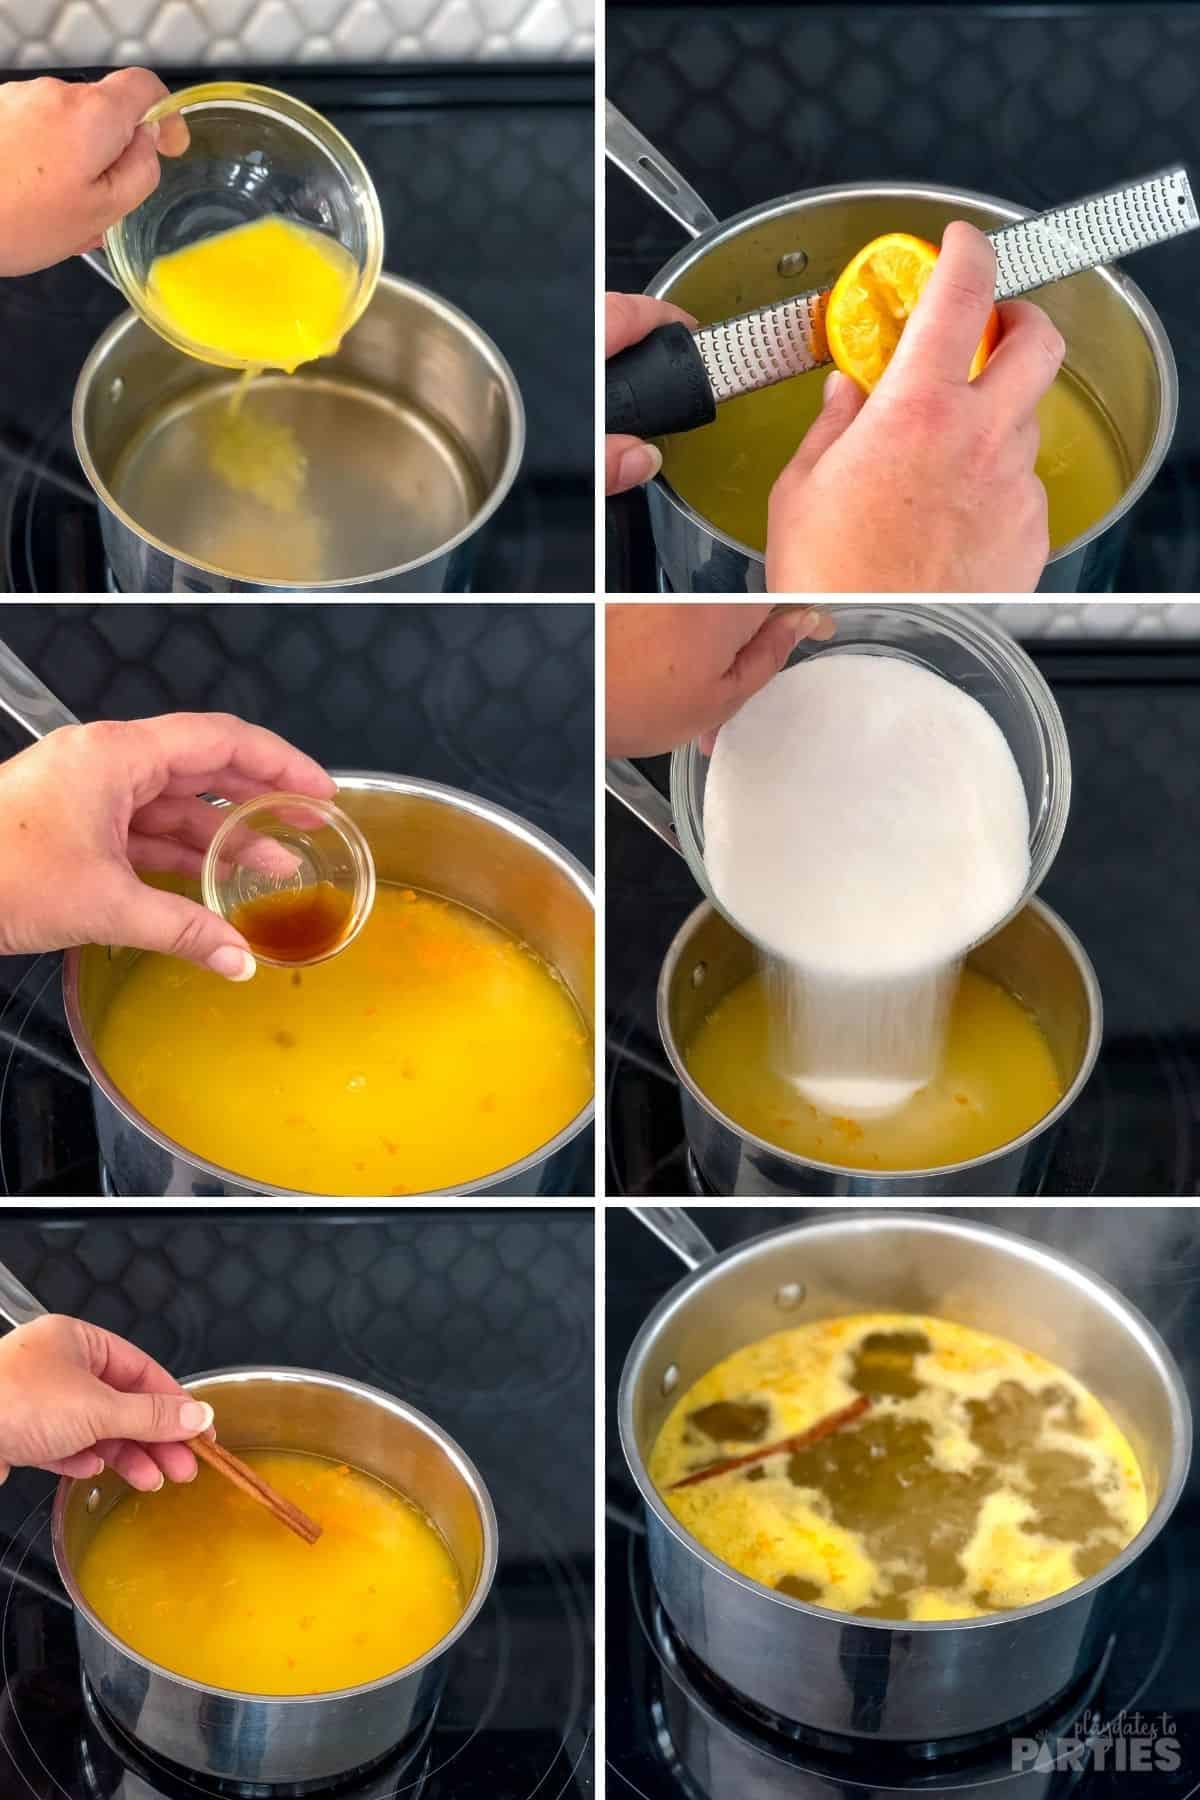 Making a simply syrup with orange juice and vanilla.